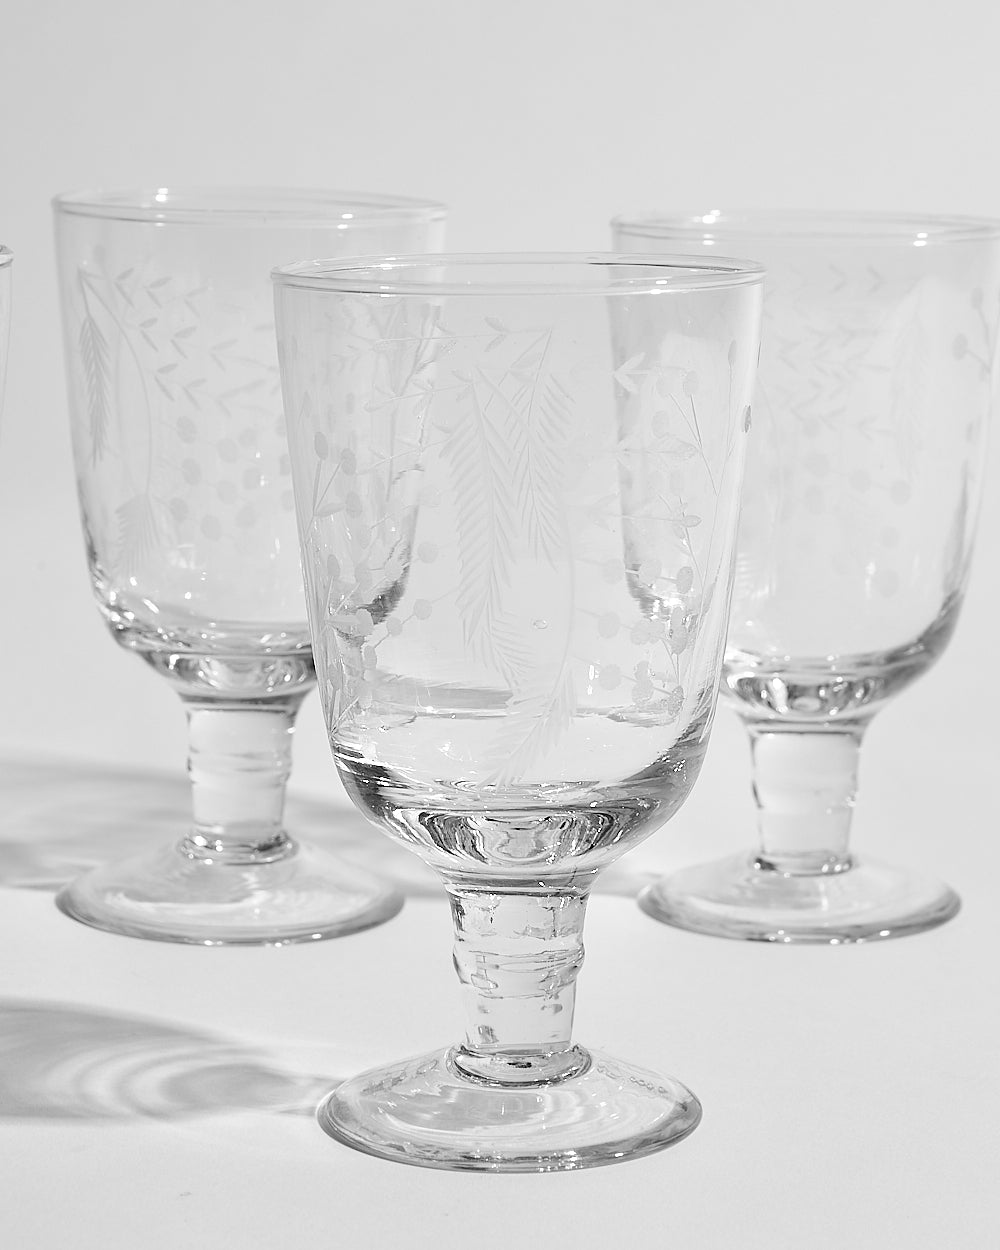 House Party Wine Glasses - Set of 4